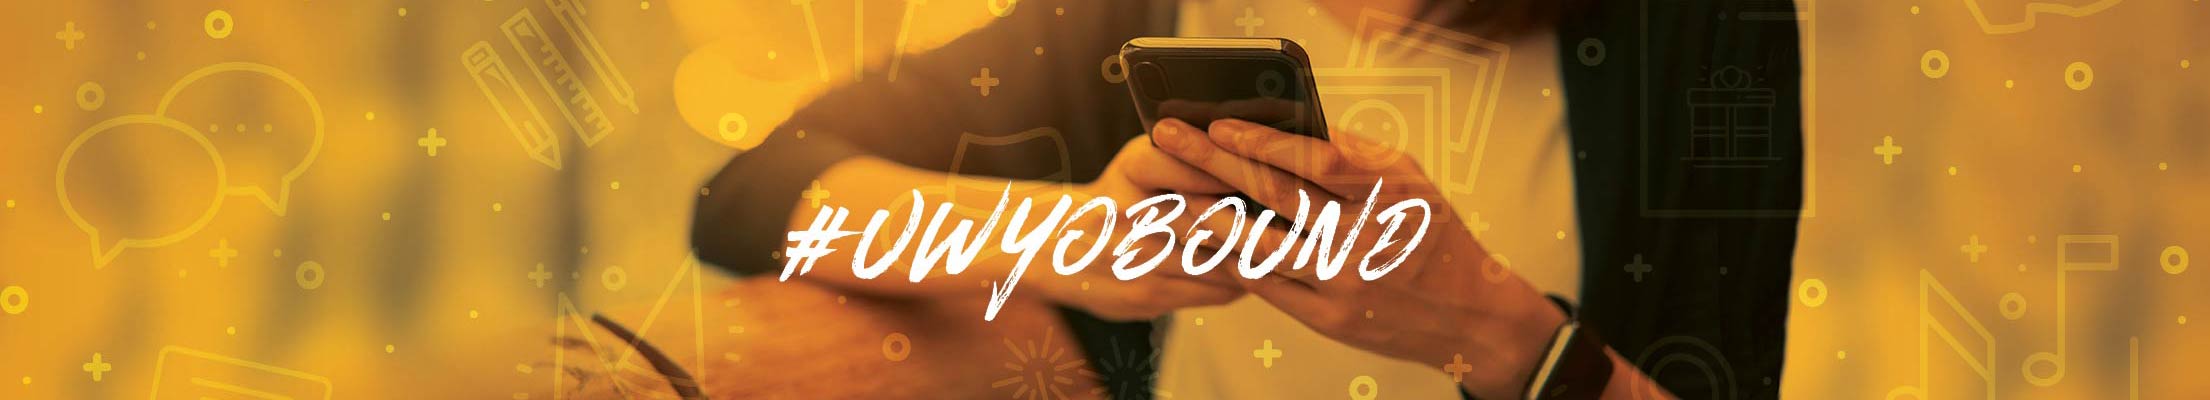 A student uses her smarthphone with the hashtag #uwyobound over top